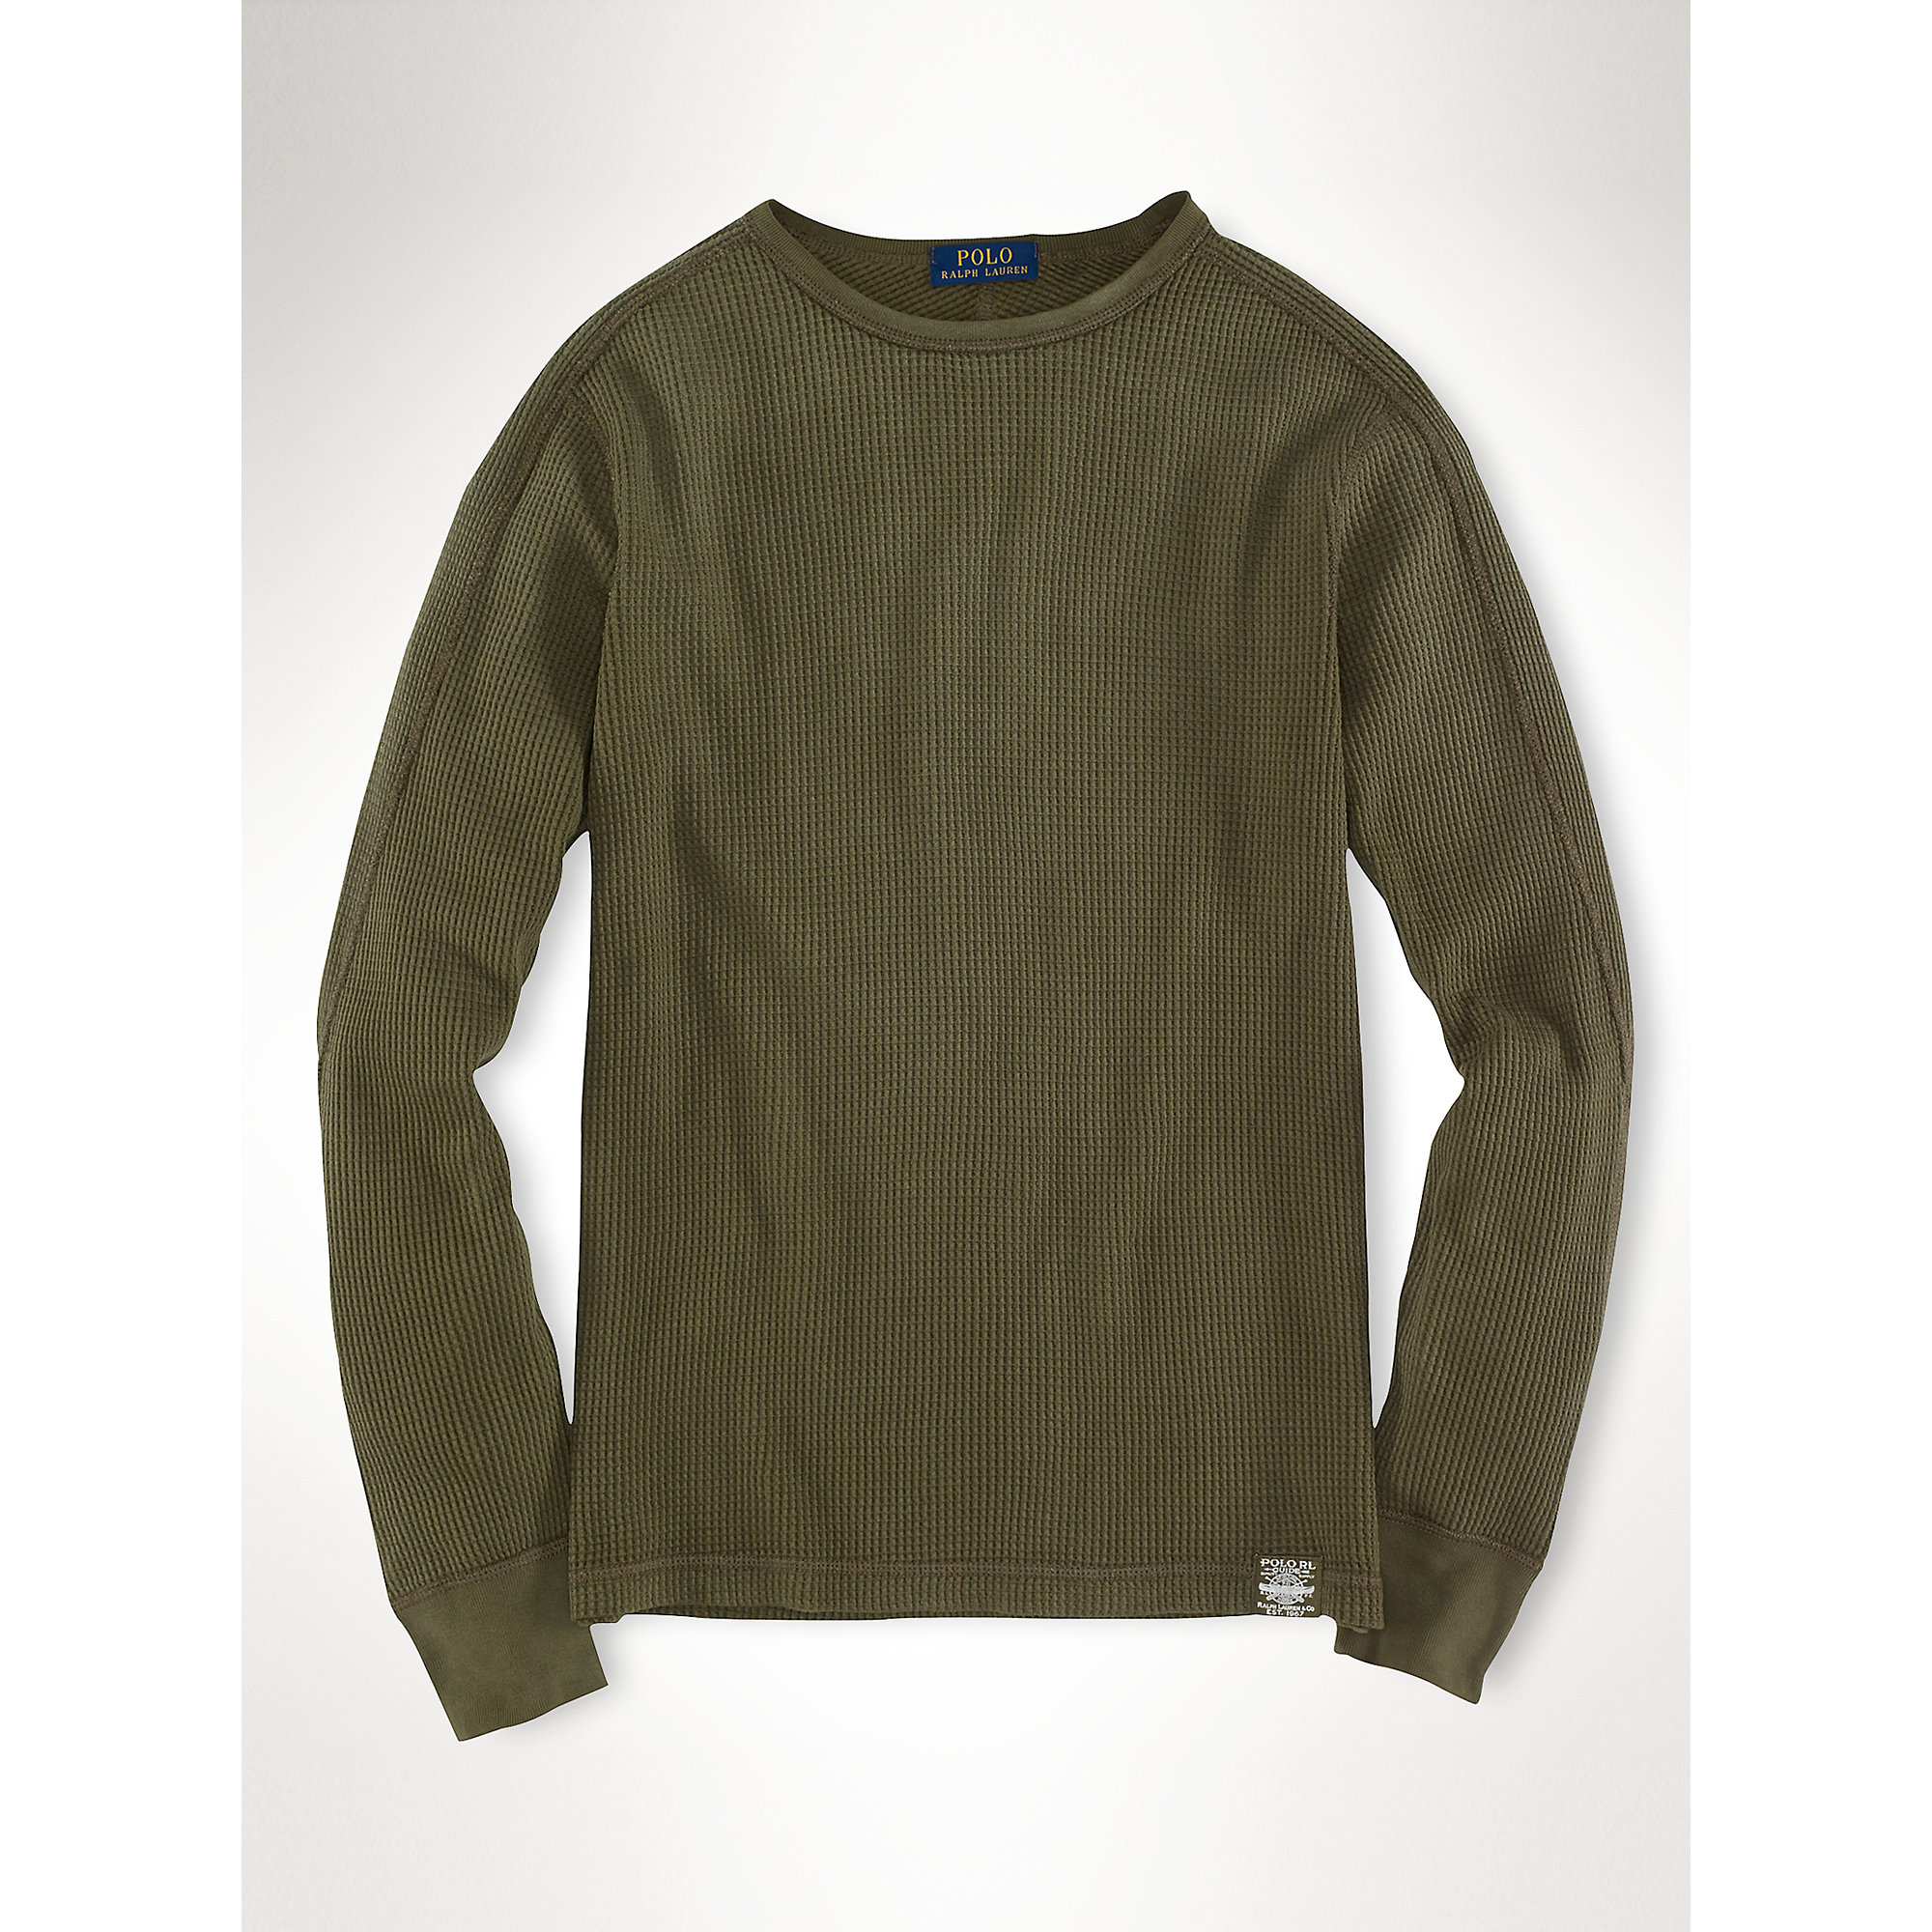 Lyst - Polo ralph lauren Waffle-Knit Crewneck Thermal in Green for Men